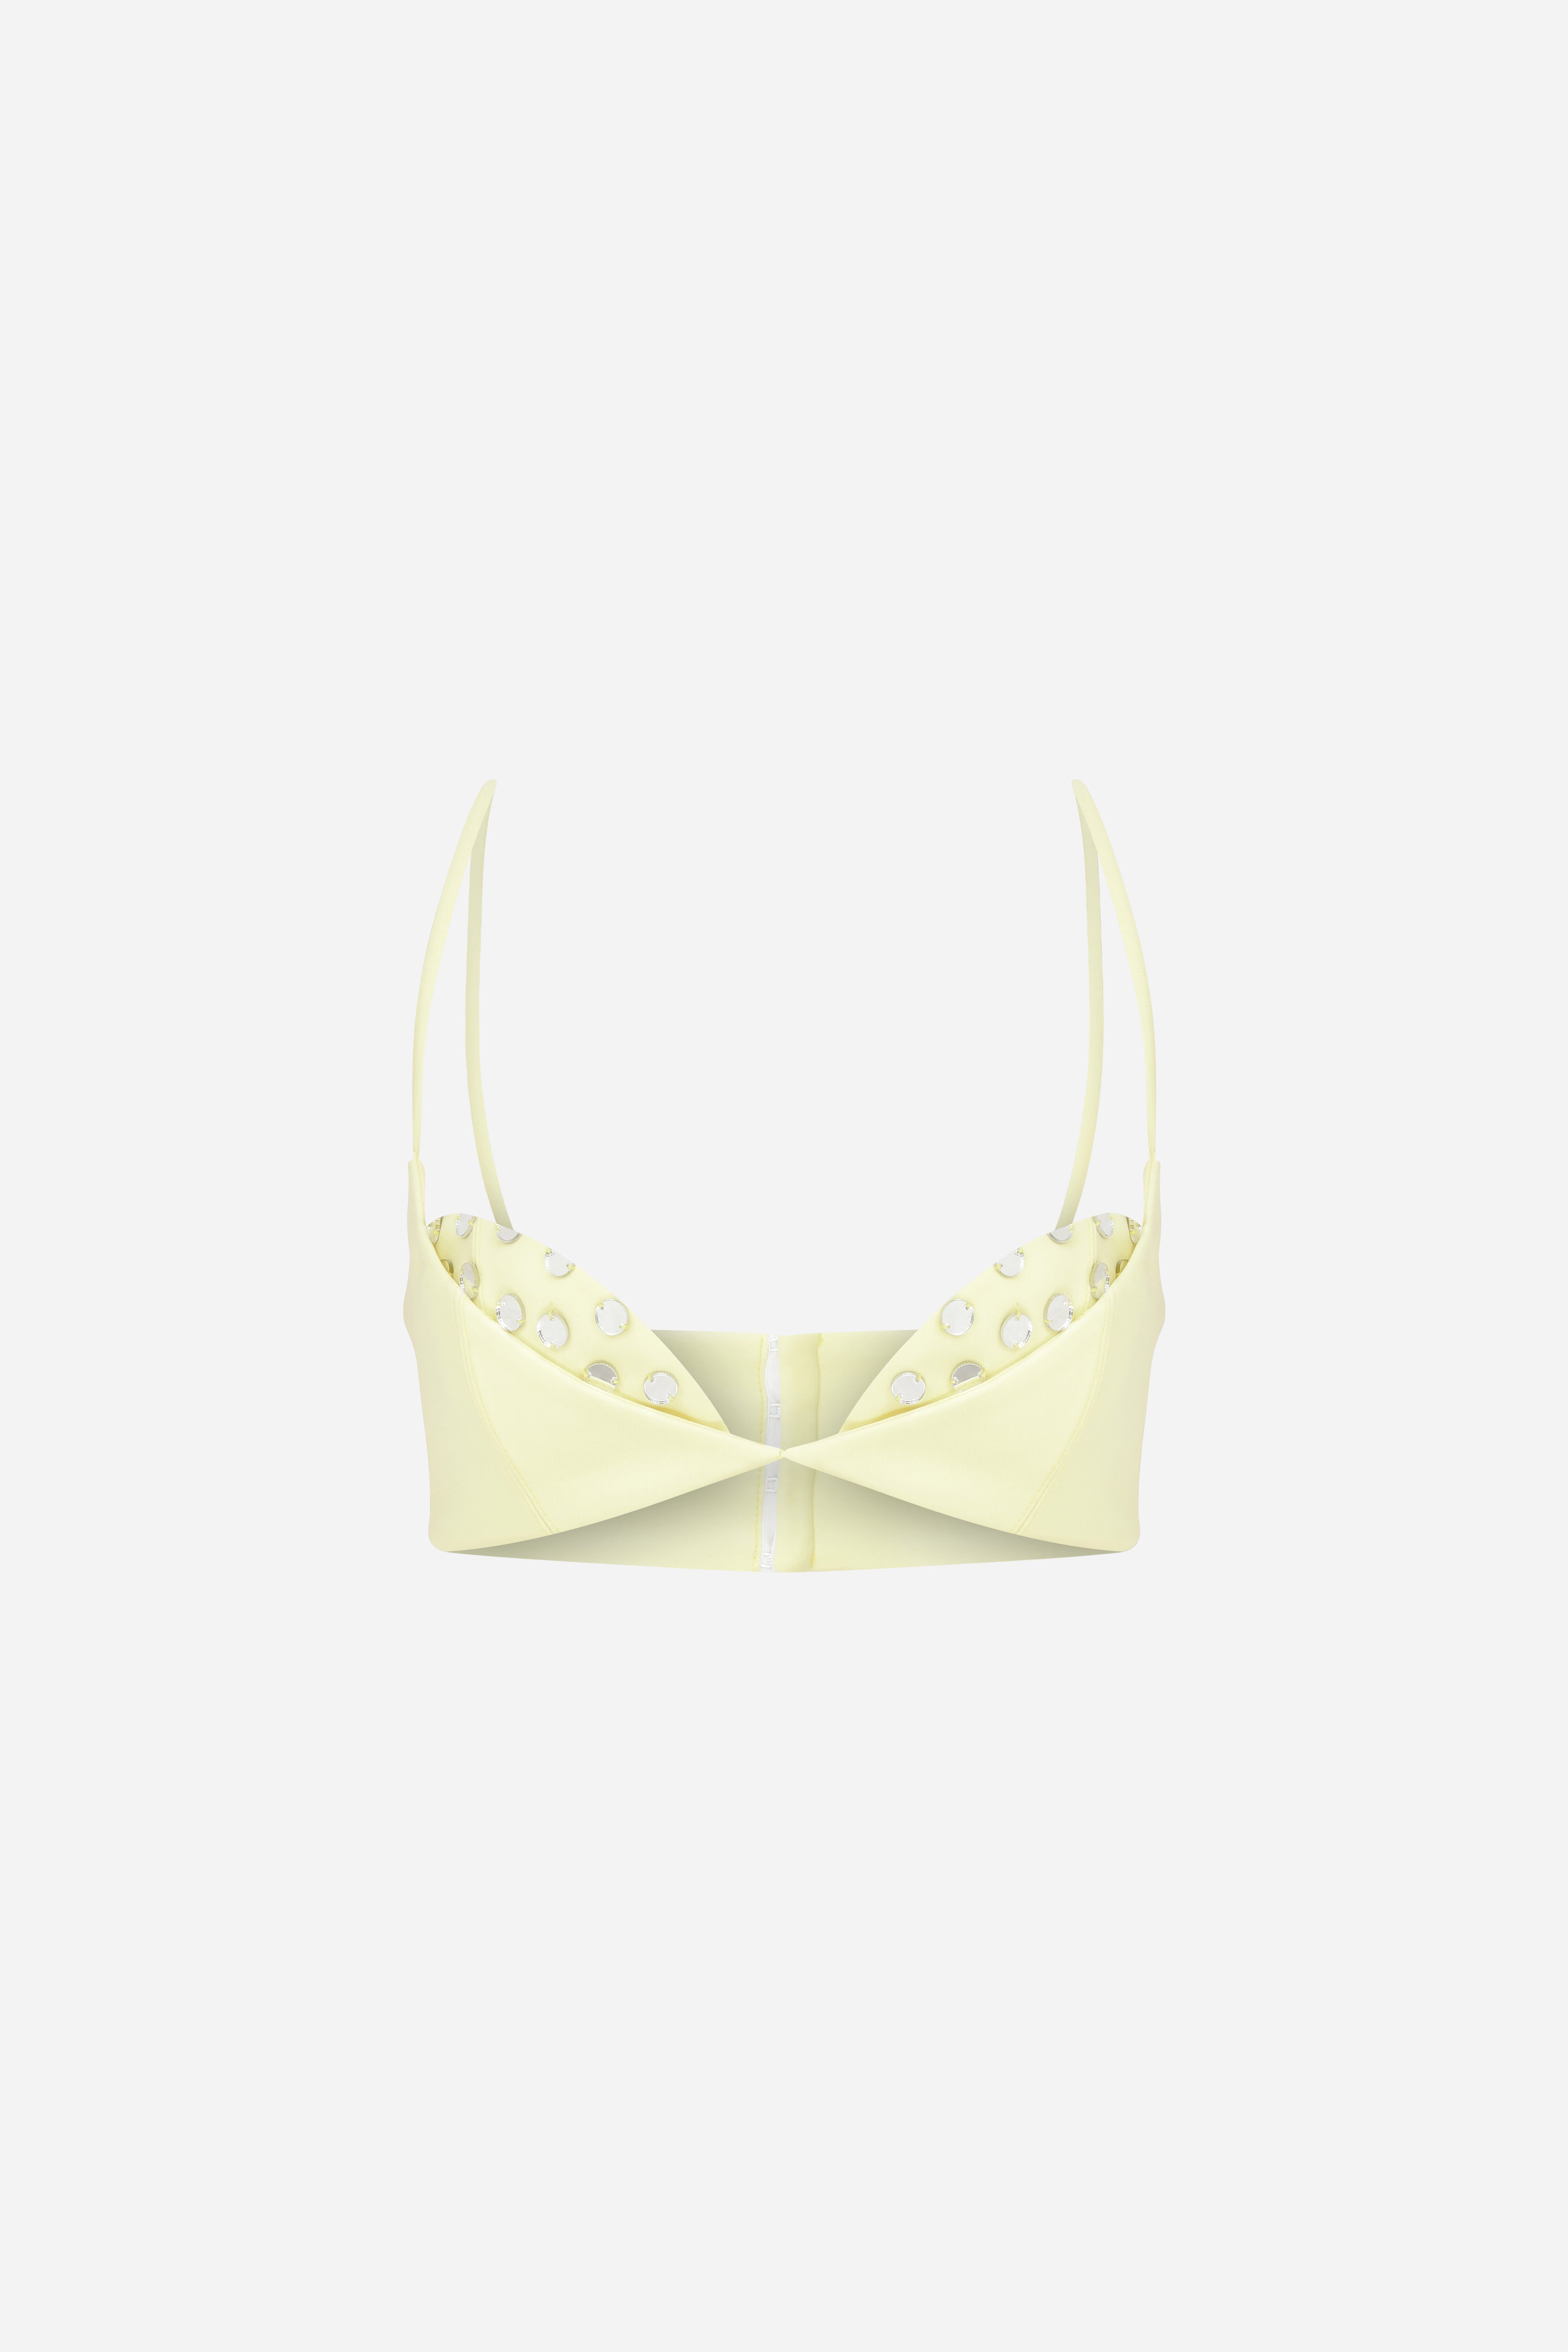 Mona - Dual Bra Top With Mirror Details